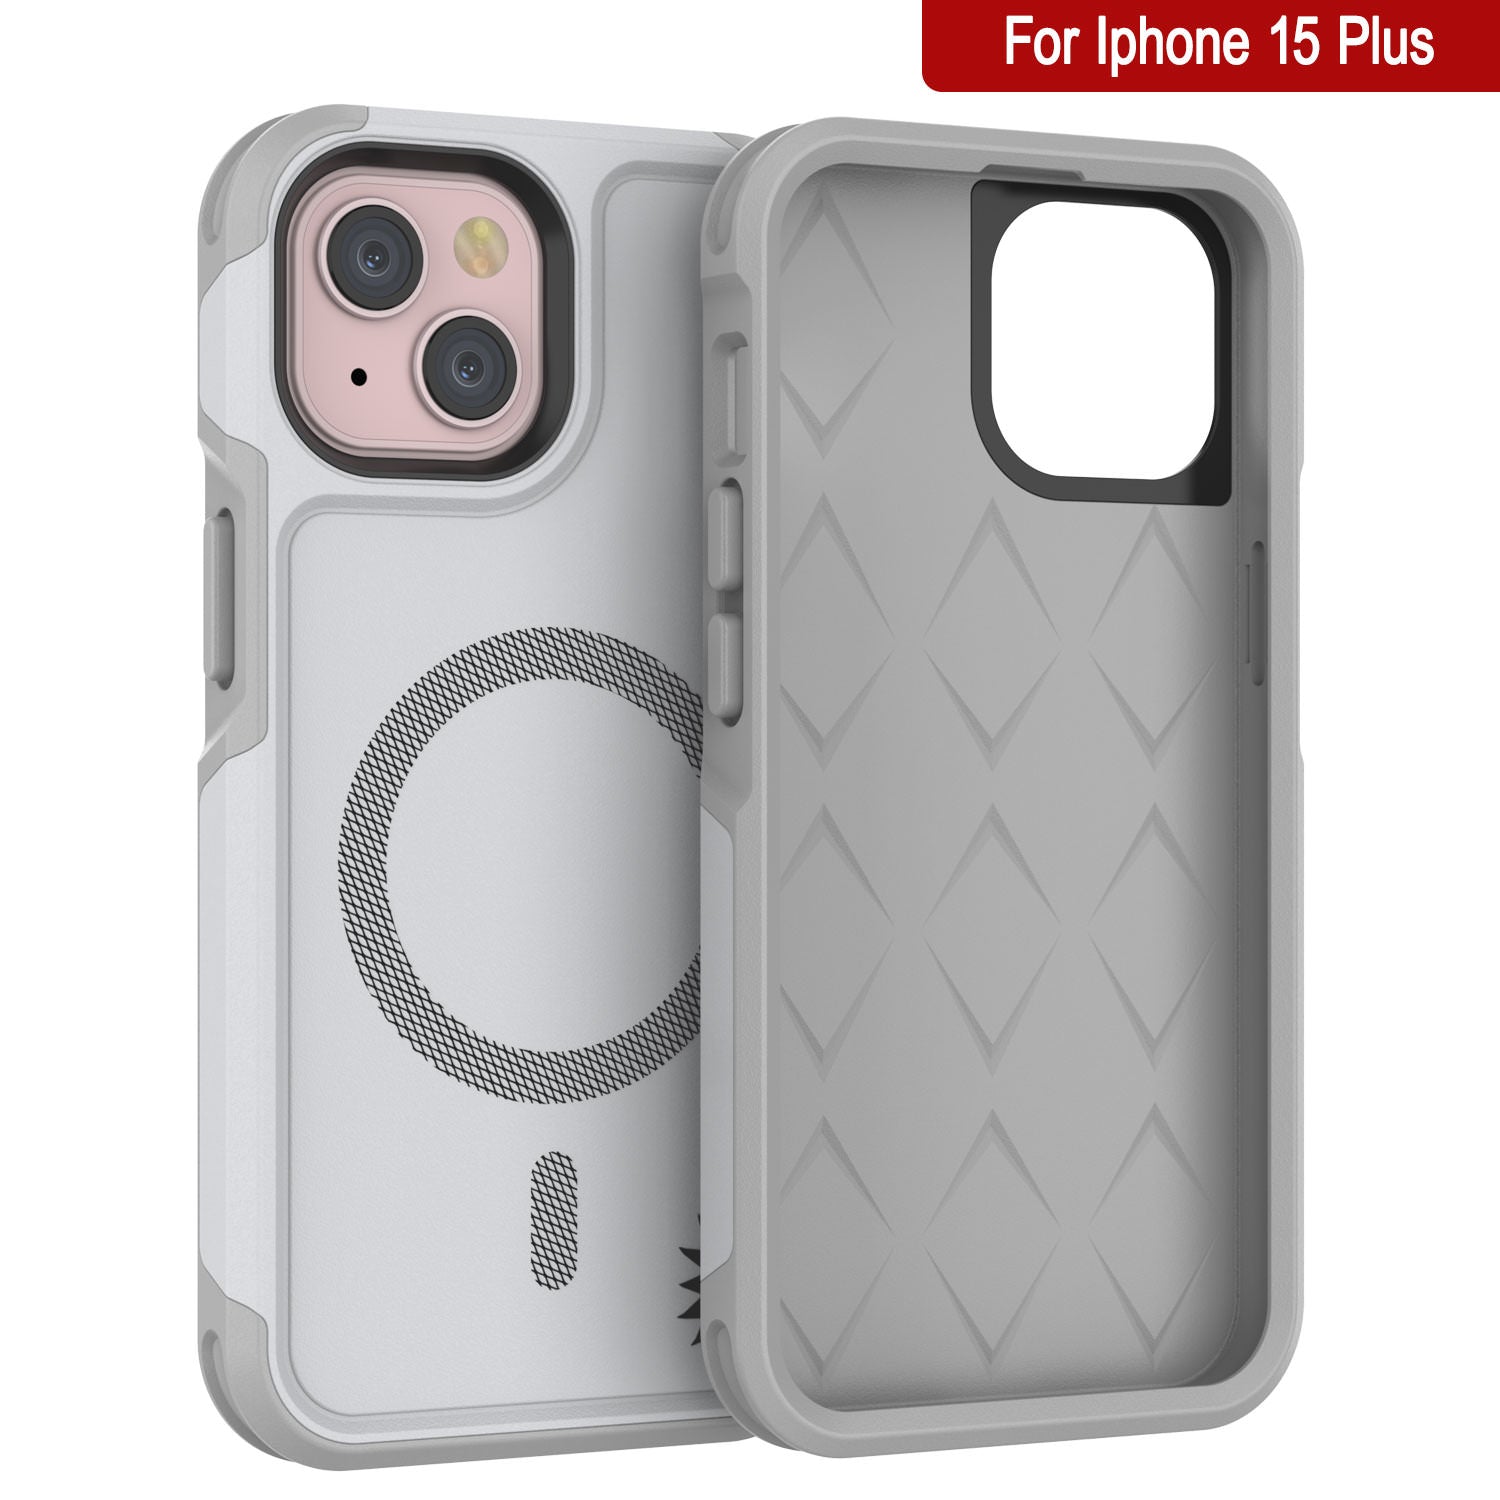 PunkCase iPhone 15 Plus Case, [Spartan 2.0 Series] Clear Rugged Heavy Duty Cover W/Built in Screen Protector [white]